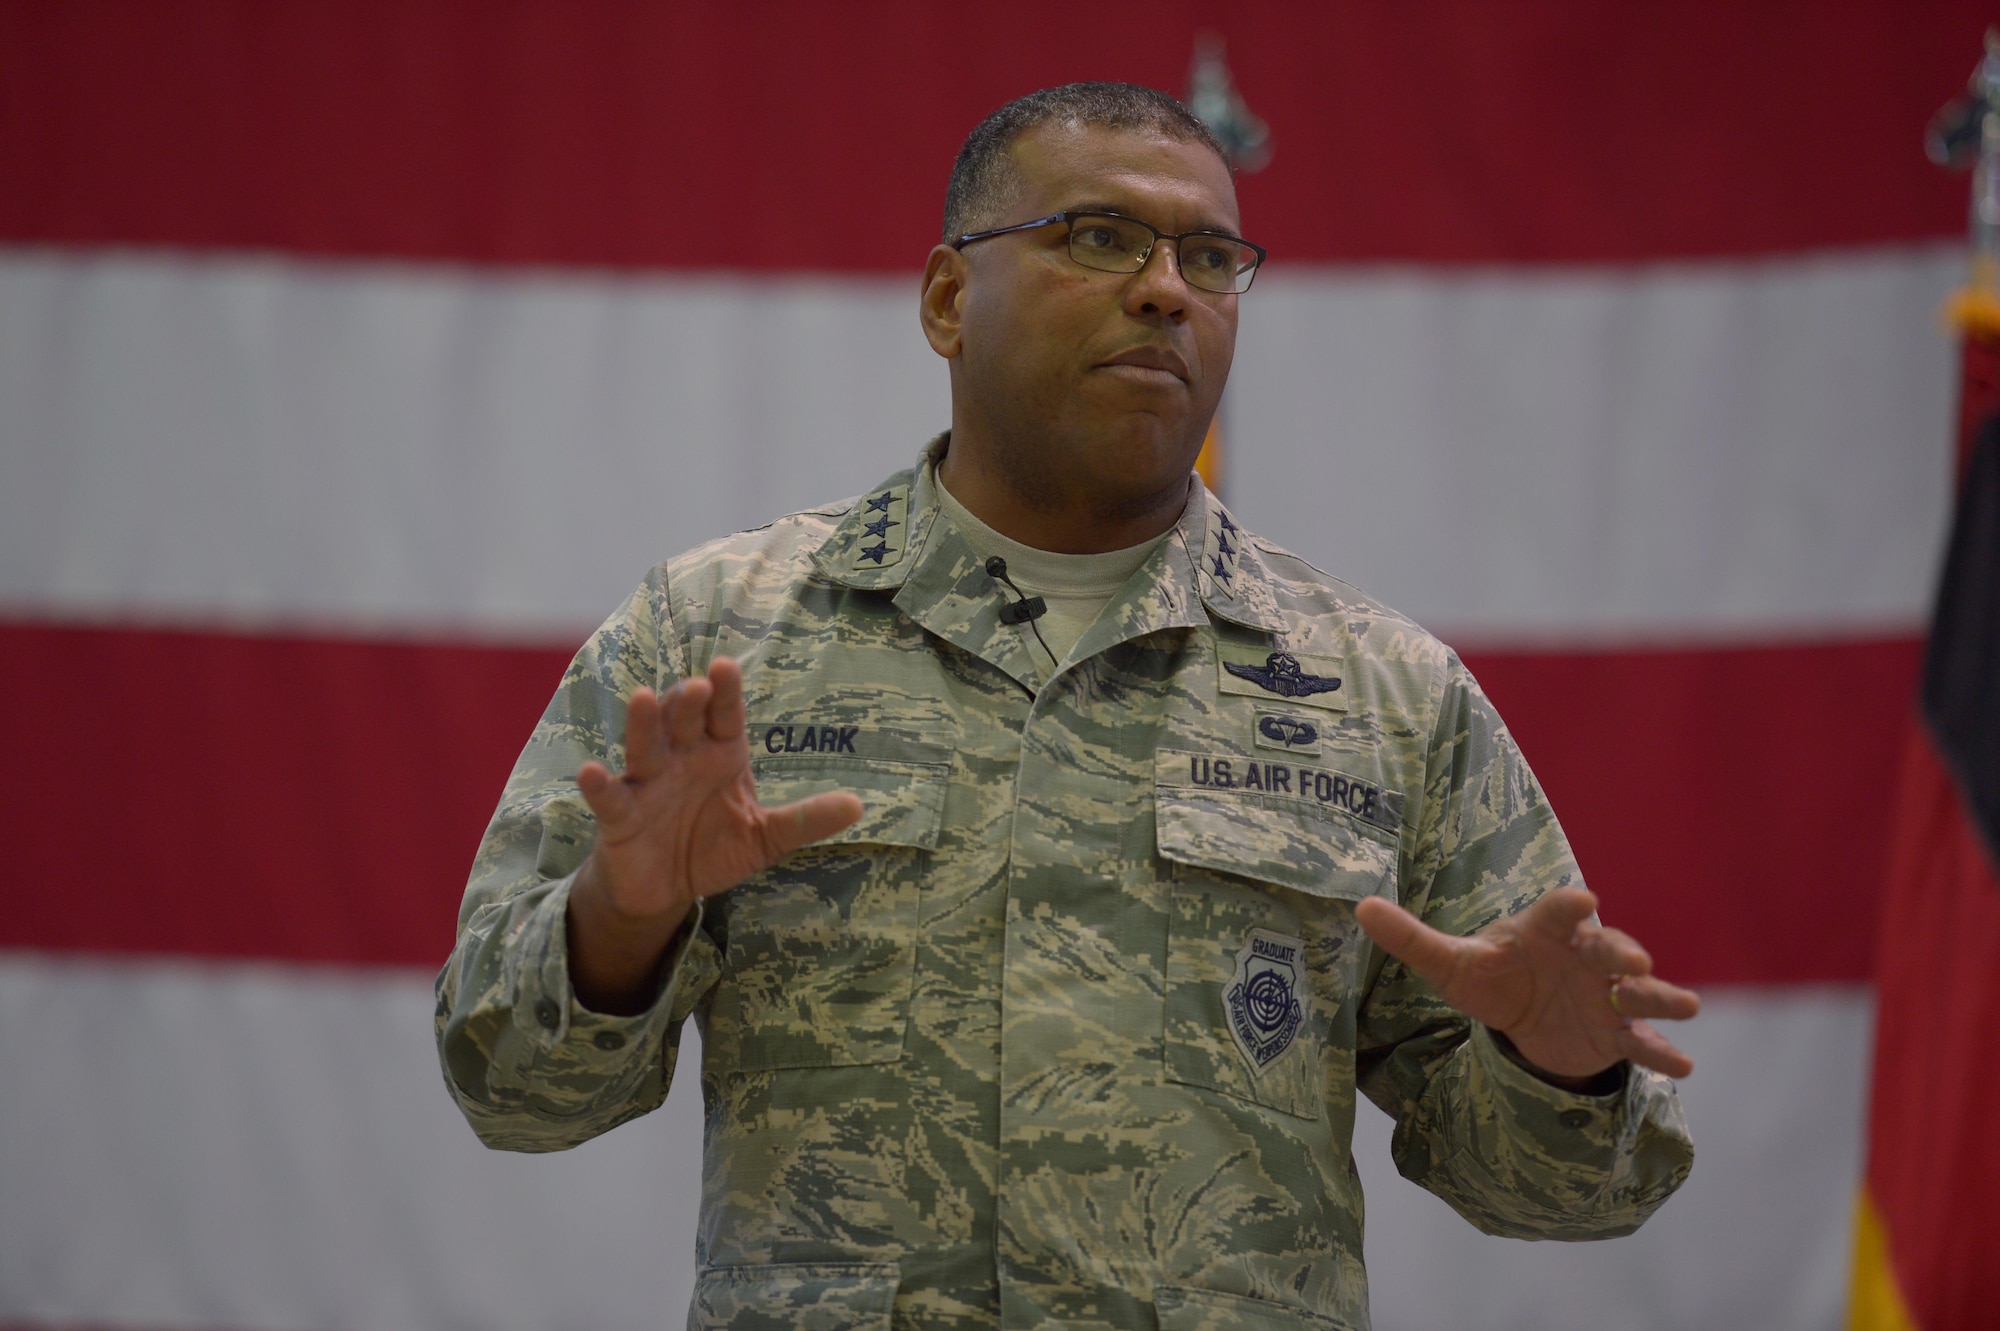 Lt. Gen. Richard Clark, 3rd Air Force and 17th Expeditionary Air Force commander, talks about his priorities during an all call at Hangar One on Spangdahlem Air Base, Germany, Dec. 14, 2016. This visit represented his first time at Spangdahlem Air Base since assuming command in October 2016. (U.S. Air Force photo by Staff Sgt. Jonathan Snyder)